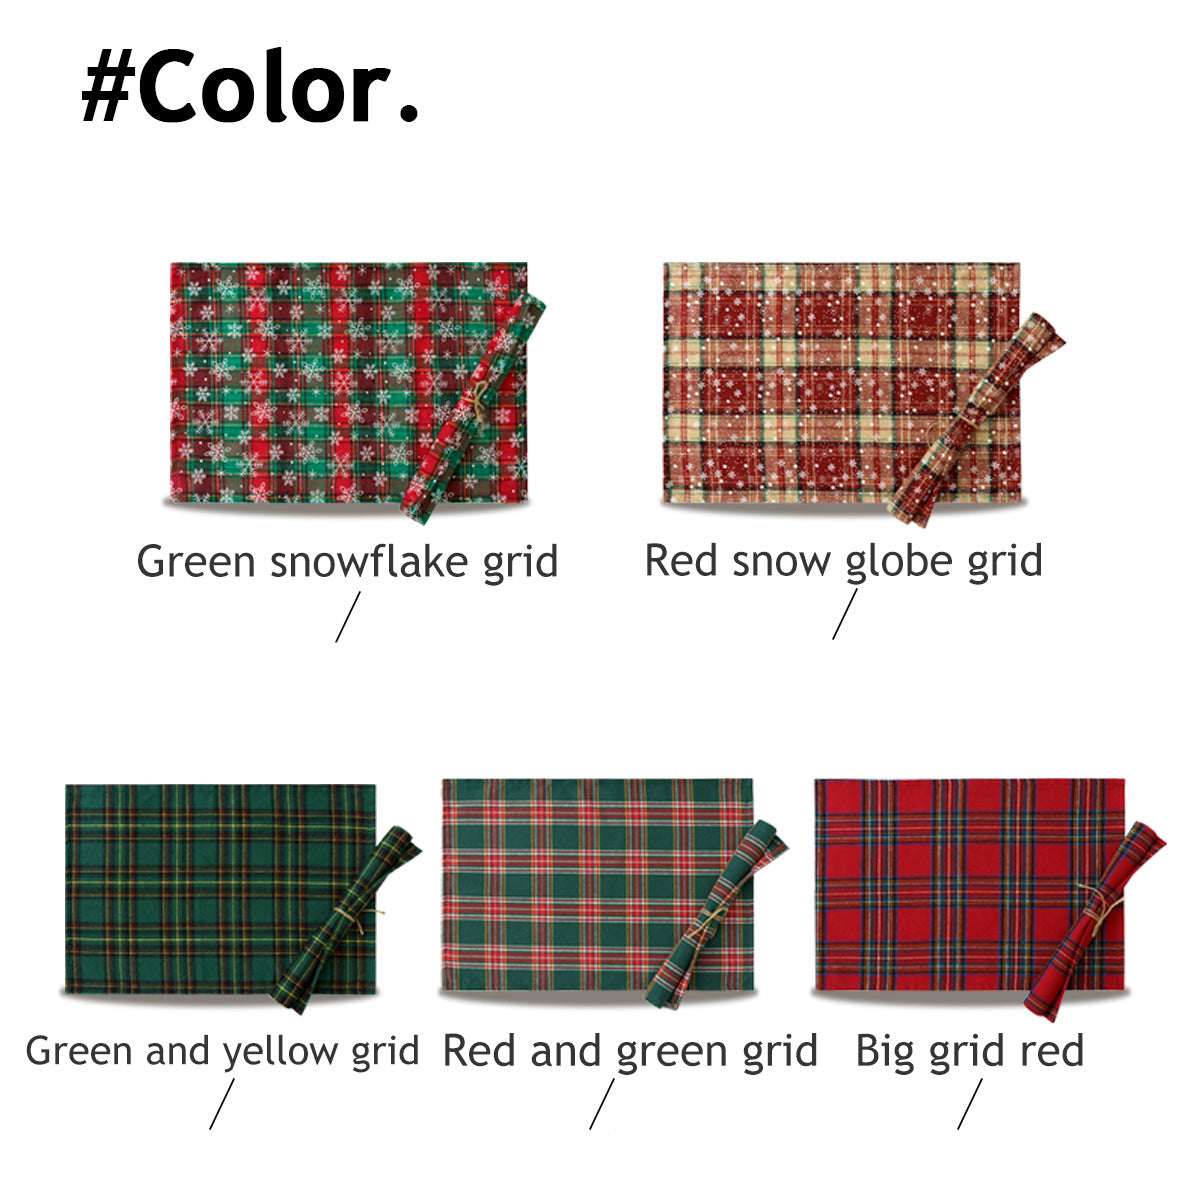 Christmas Series New Year Cloth Plaid Table Flag Insulation Pad, Outdoor and Indoor Christmas decorations Items, Christmas ornaments, Christmas tree decorations, salt dough ornaments, Christmas window decorations, cheap Christmas decorations, snowmen, and ornaments.